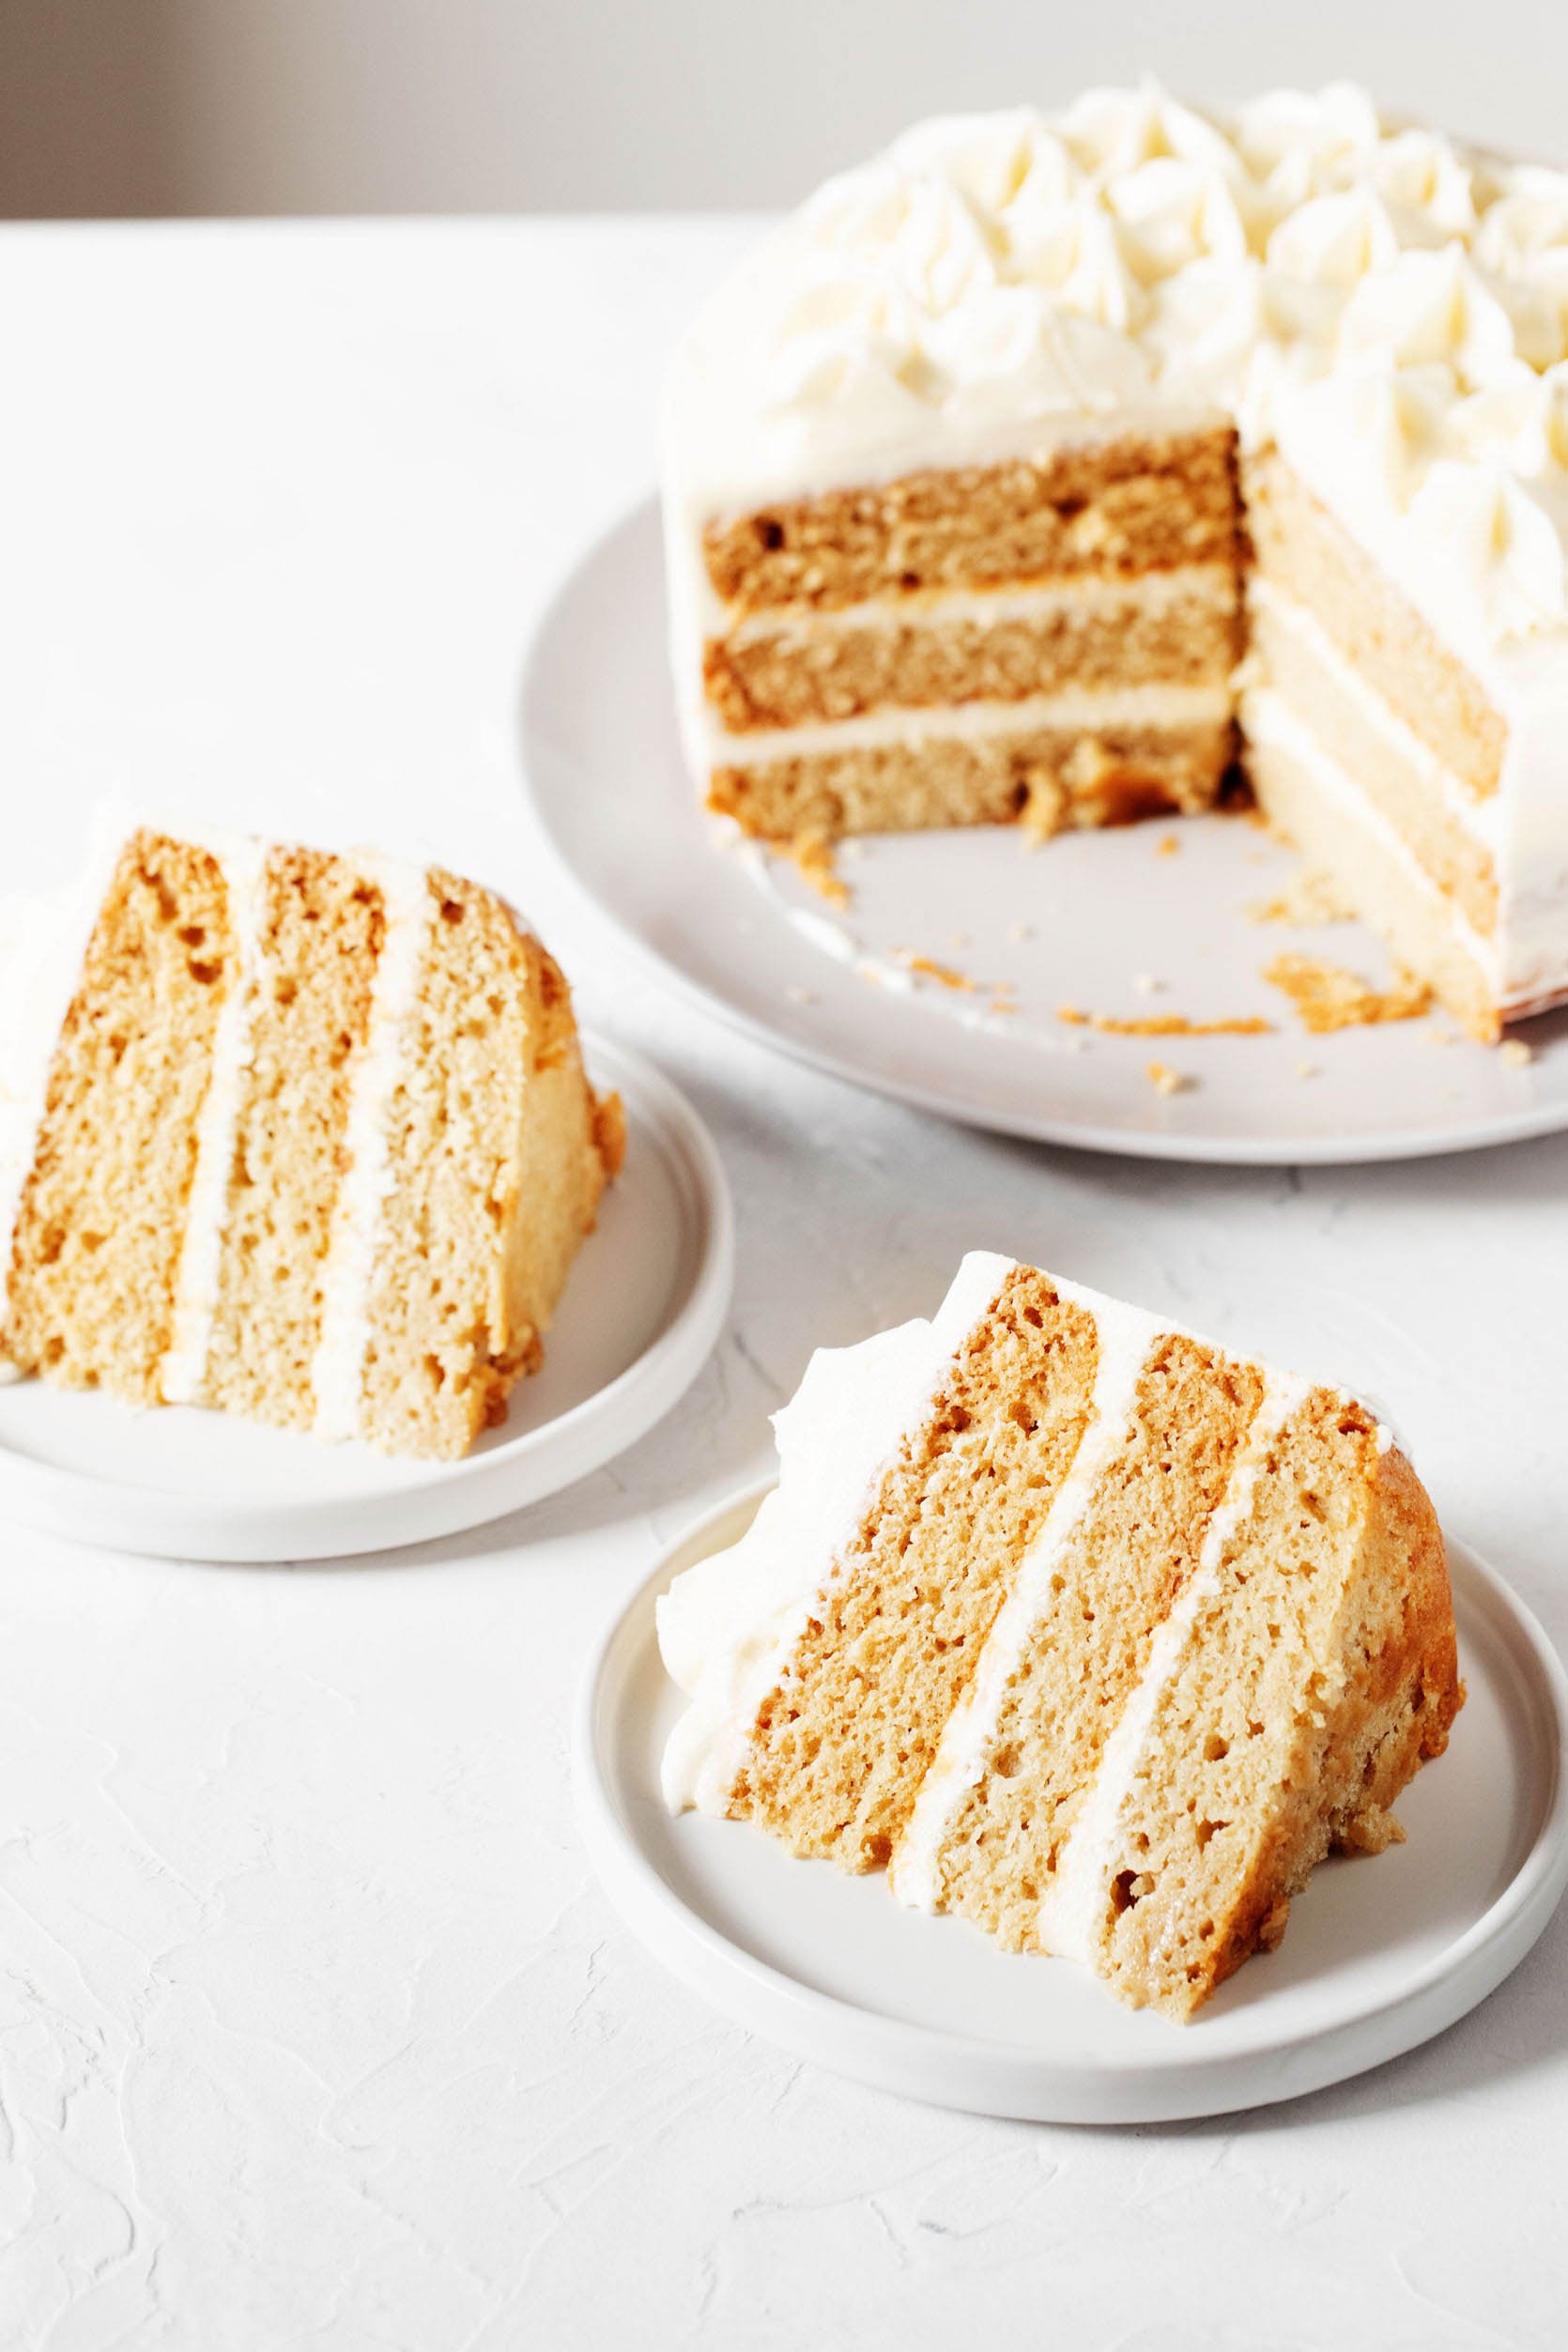 A pale yellow layer cake with whipped, white buttercream frosting has had slices cut out. Two slices rest on small dessert plates on top of the cake, all on top of a white surface.